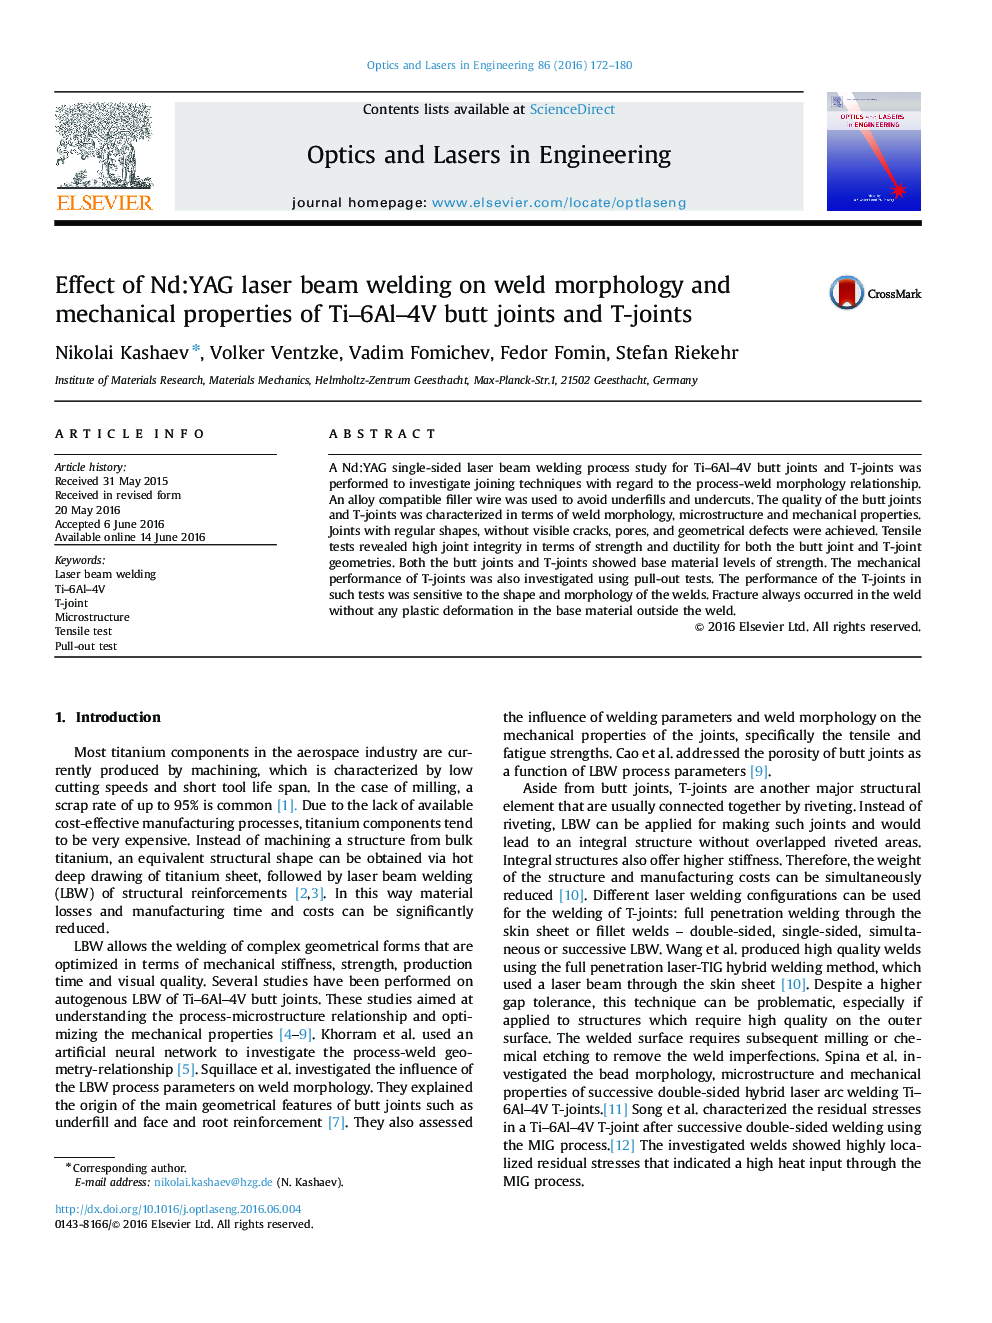 Effect of Nd:YAG laser beam welding on weld morphology and mechanical properties of Ti–6Al–4V butt joints and T-joints